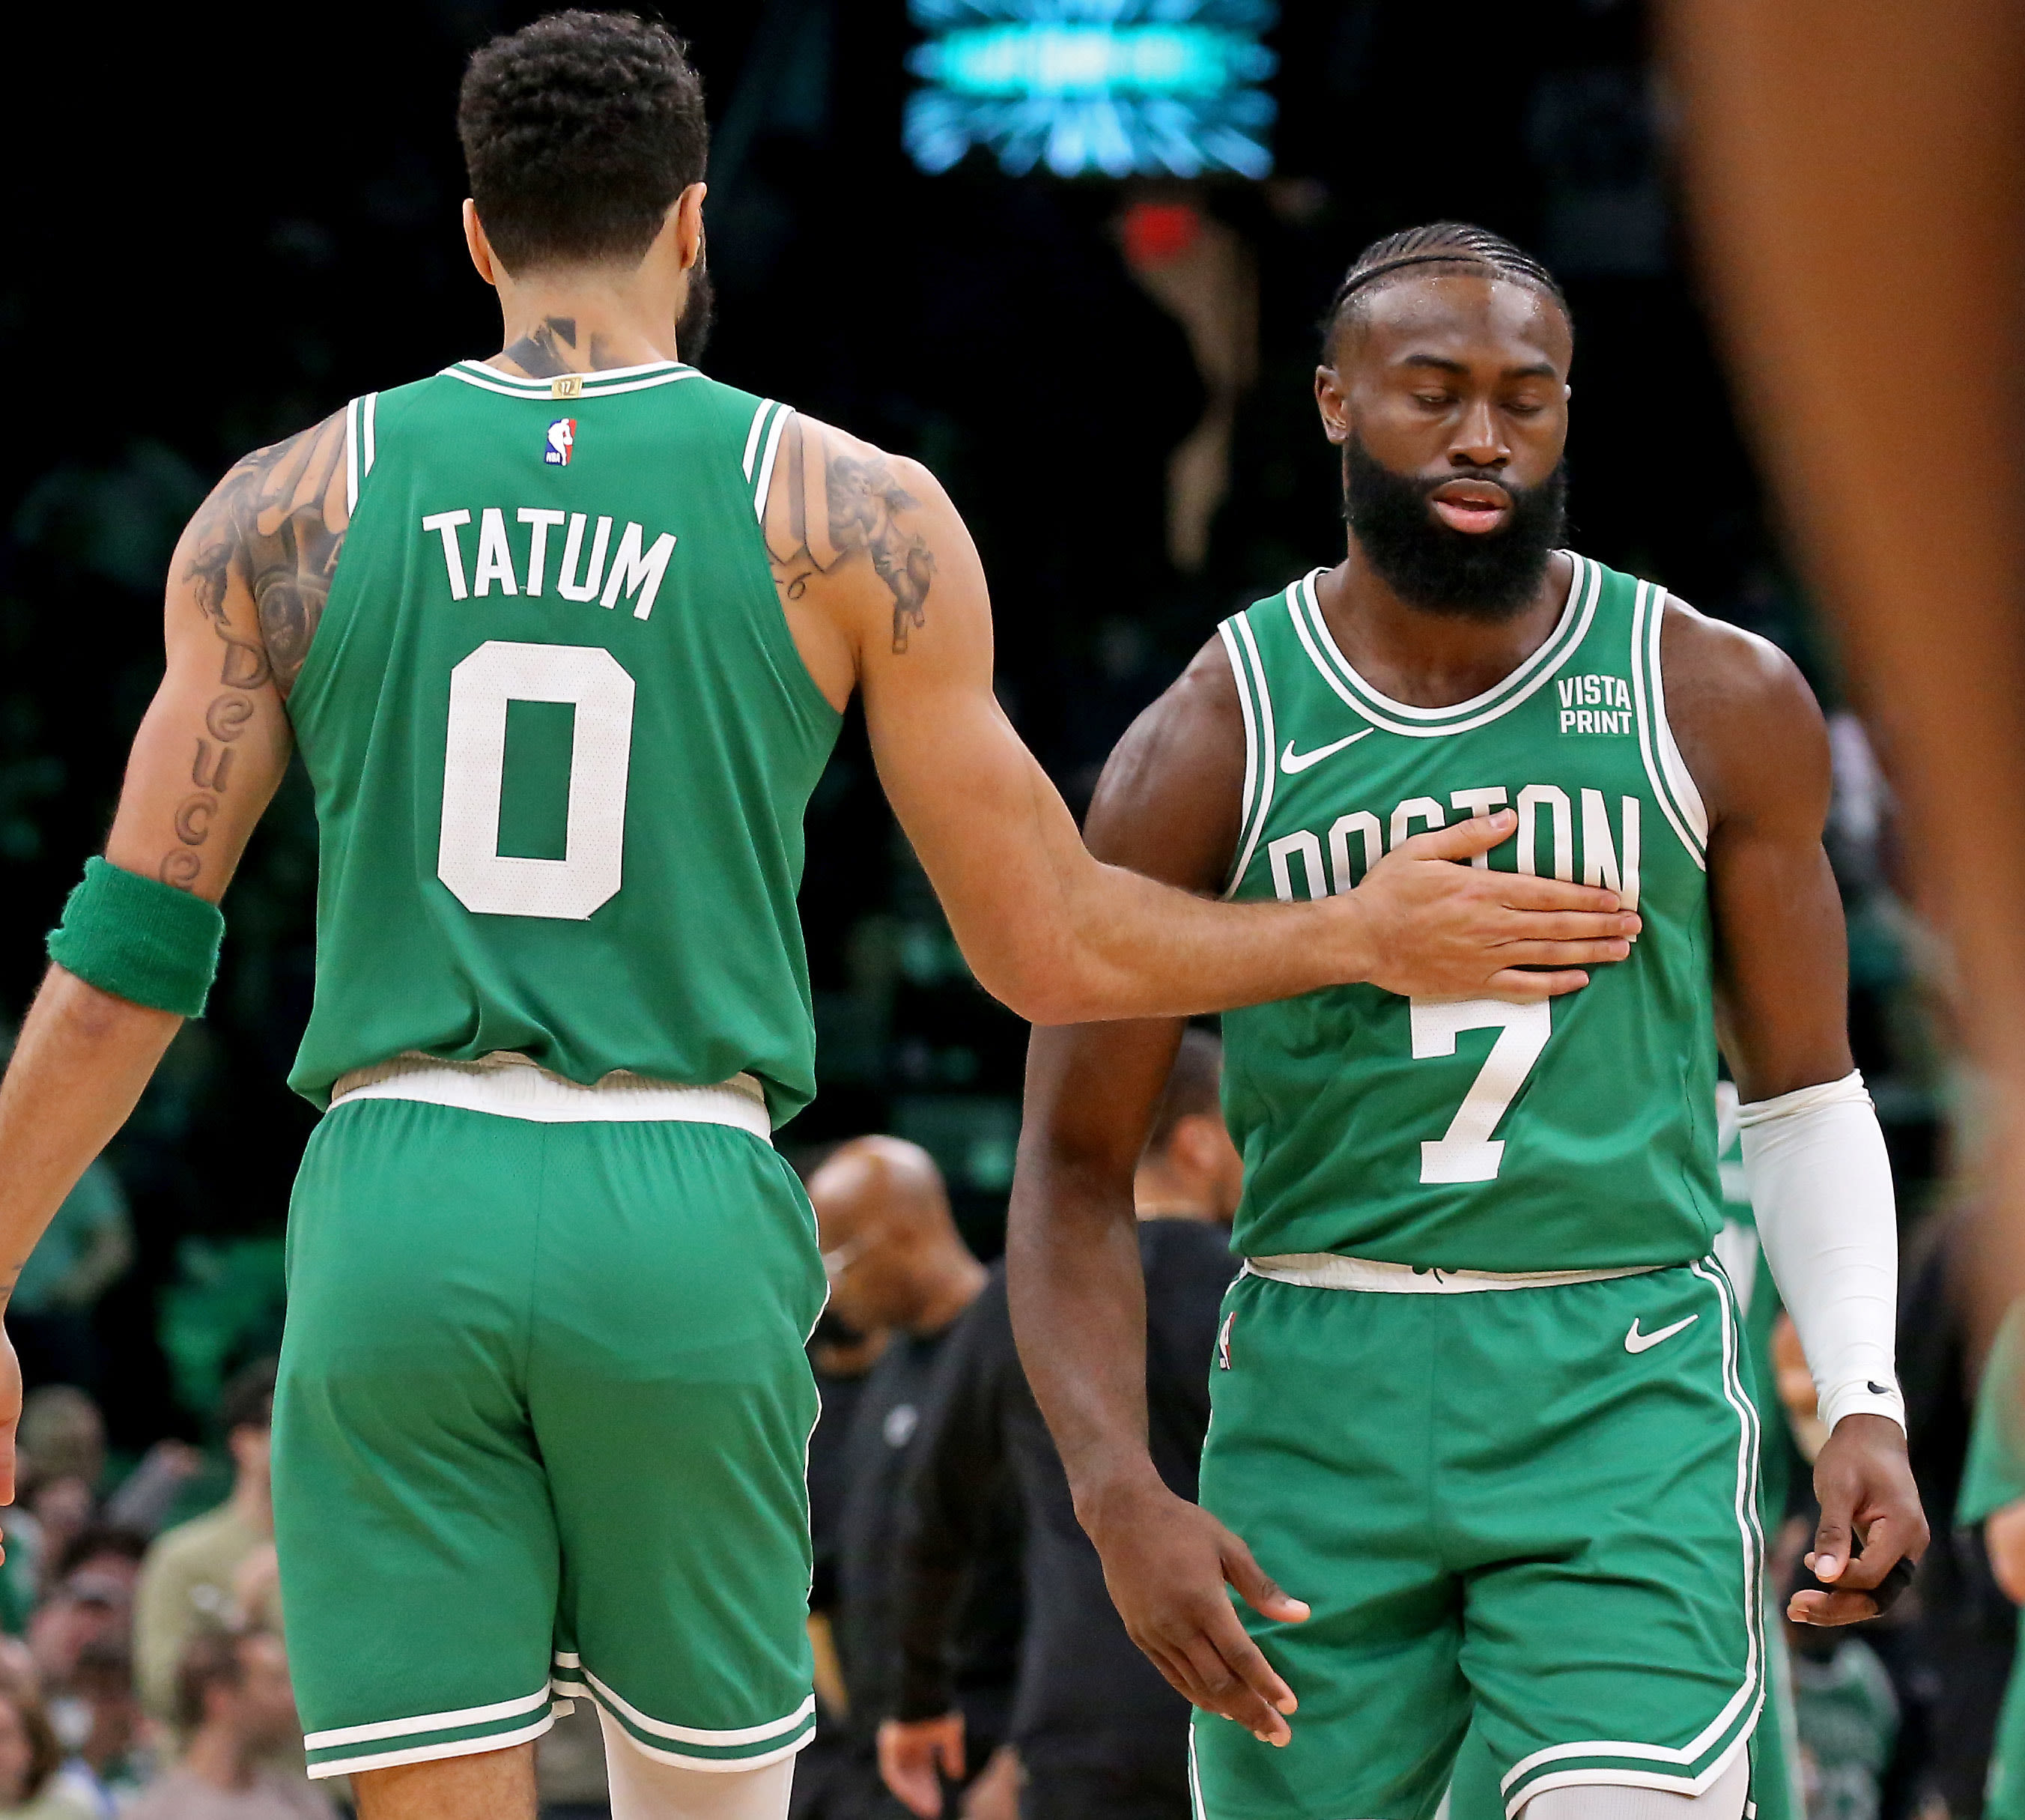 ASK IRA: Have Celtics exposed Heat’s 3-point limitations?